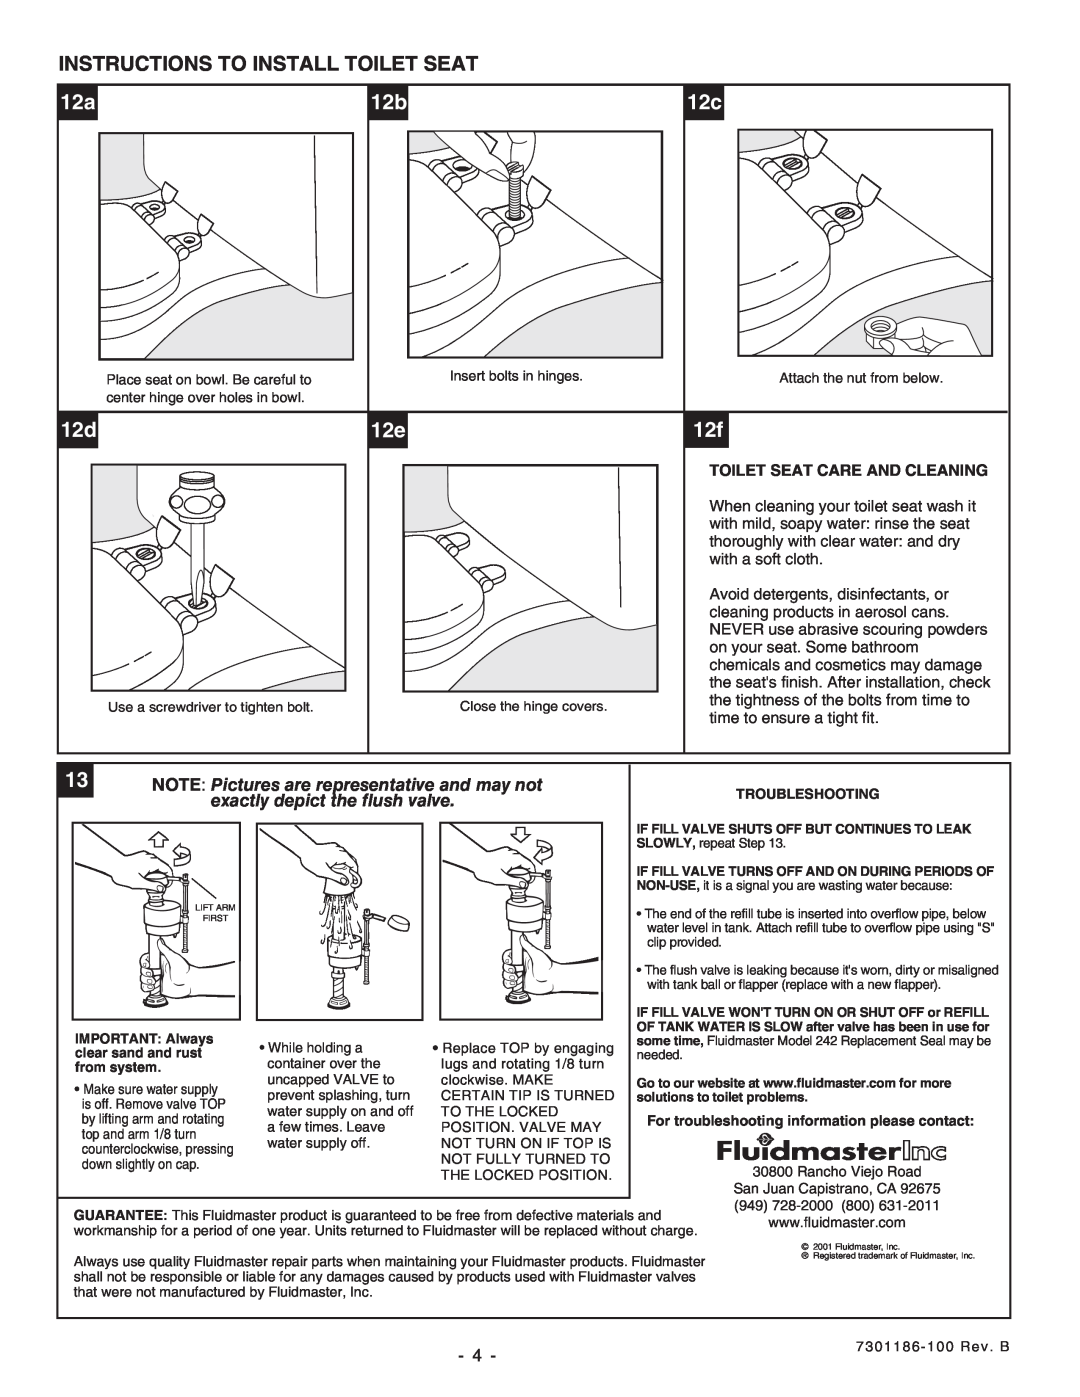 American Standard 2399, 2359, 2388 Instructions To Install Toilet Seat, NOTE Pictures are representative and may not 